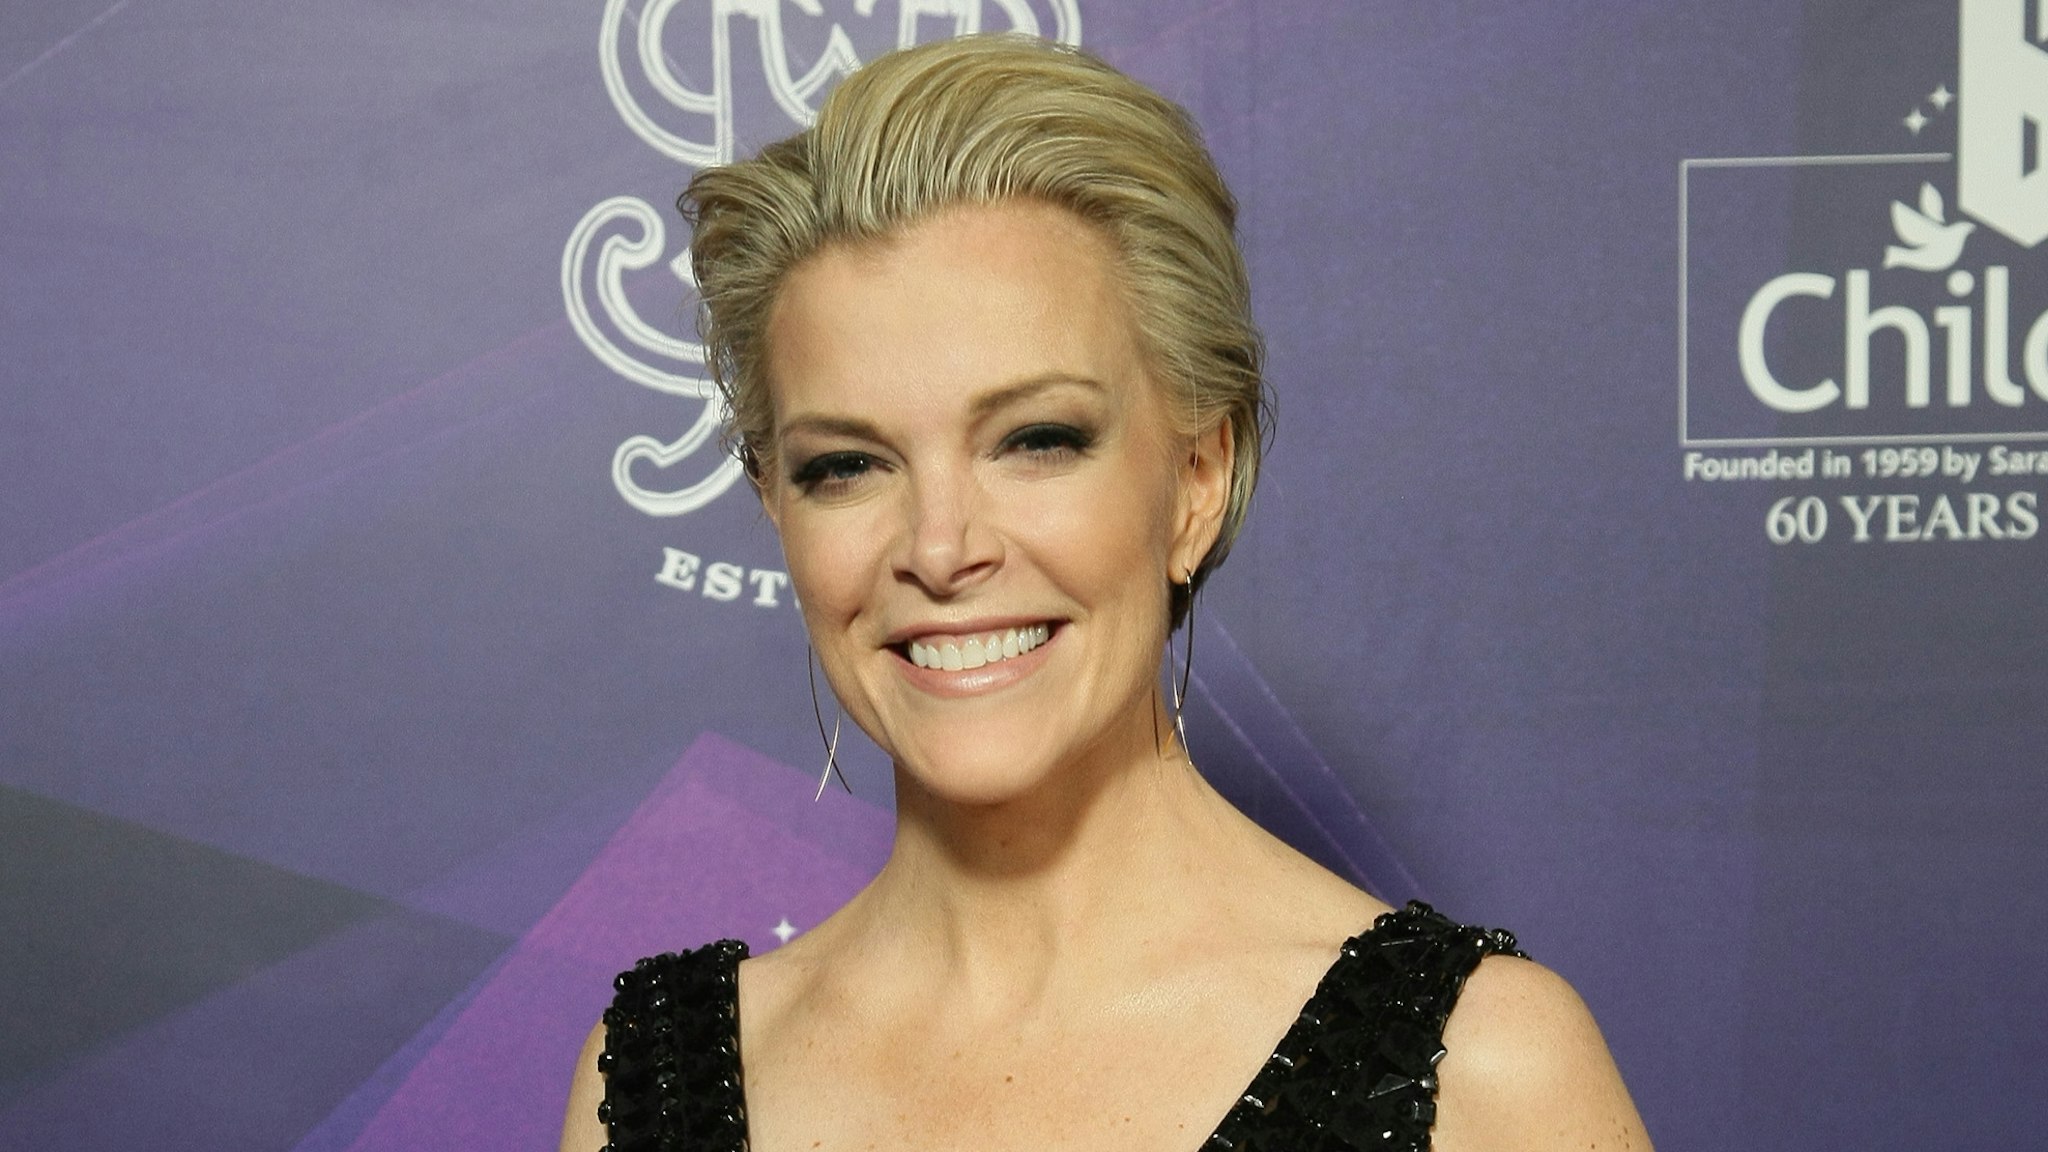 Megyn Kelly poses for photos on the red carpet during the Childhelp's 15th annual Drive The Dream Gala at The Phoenician Resort on February 02, 2019 in Scottsdale, Arizona.